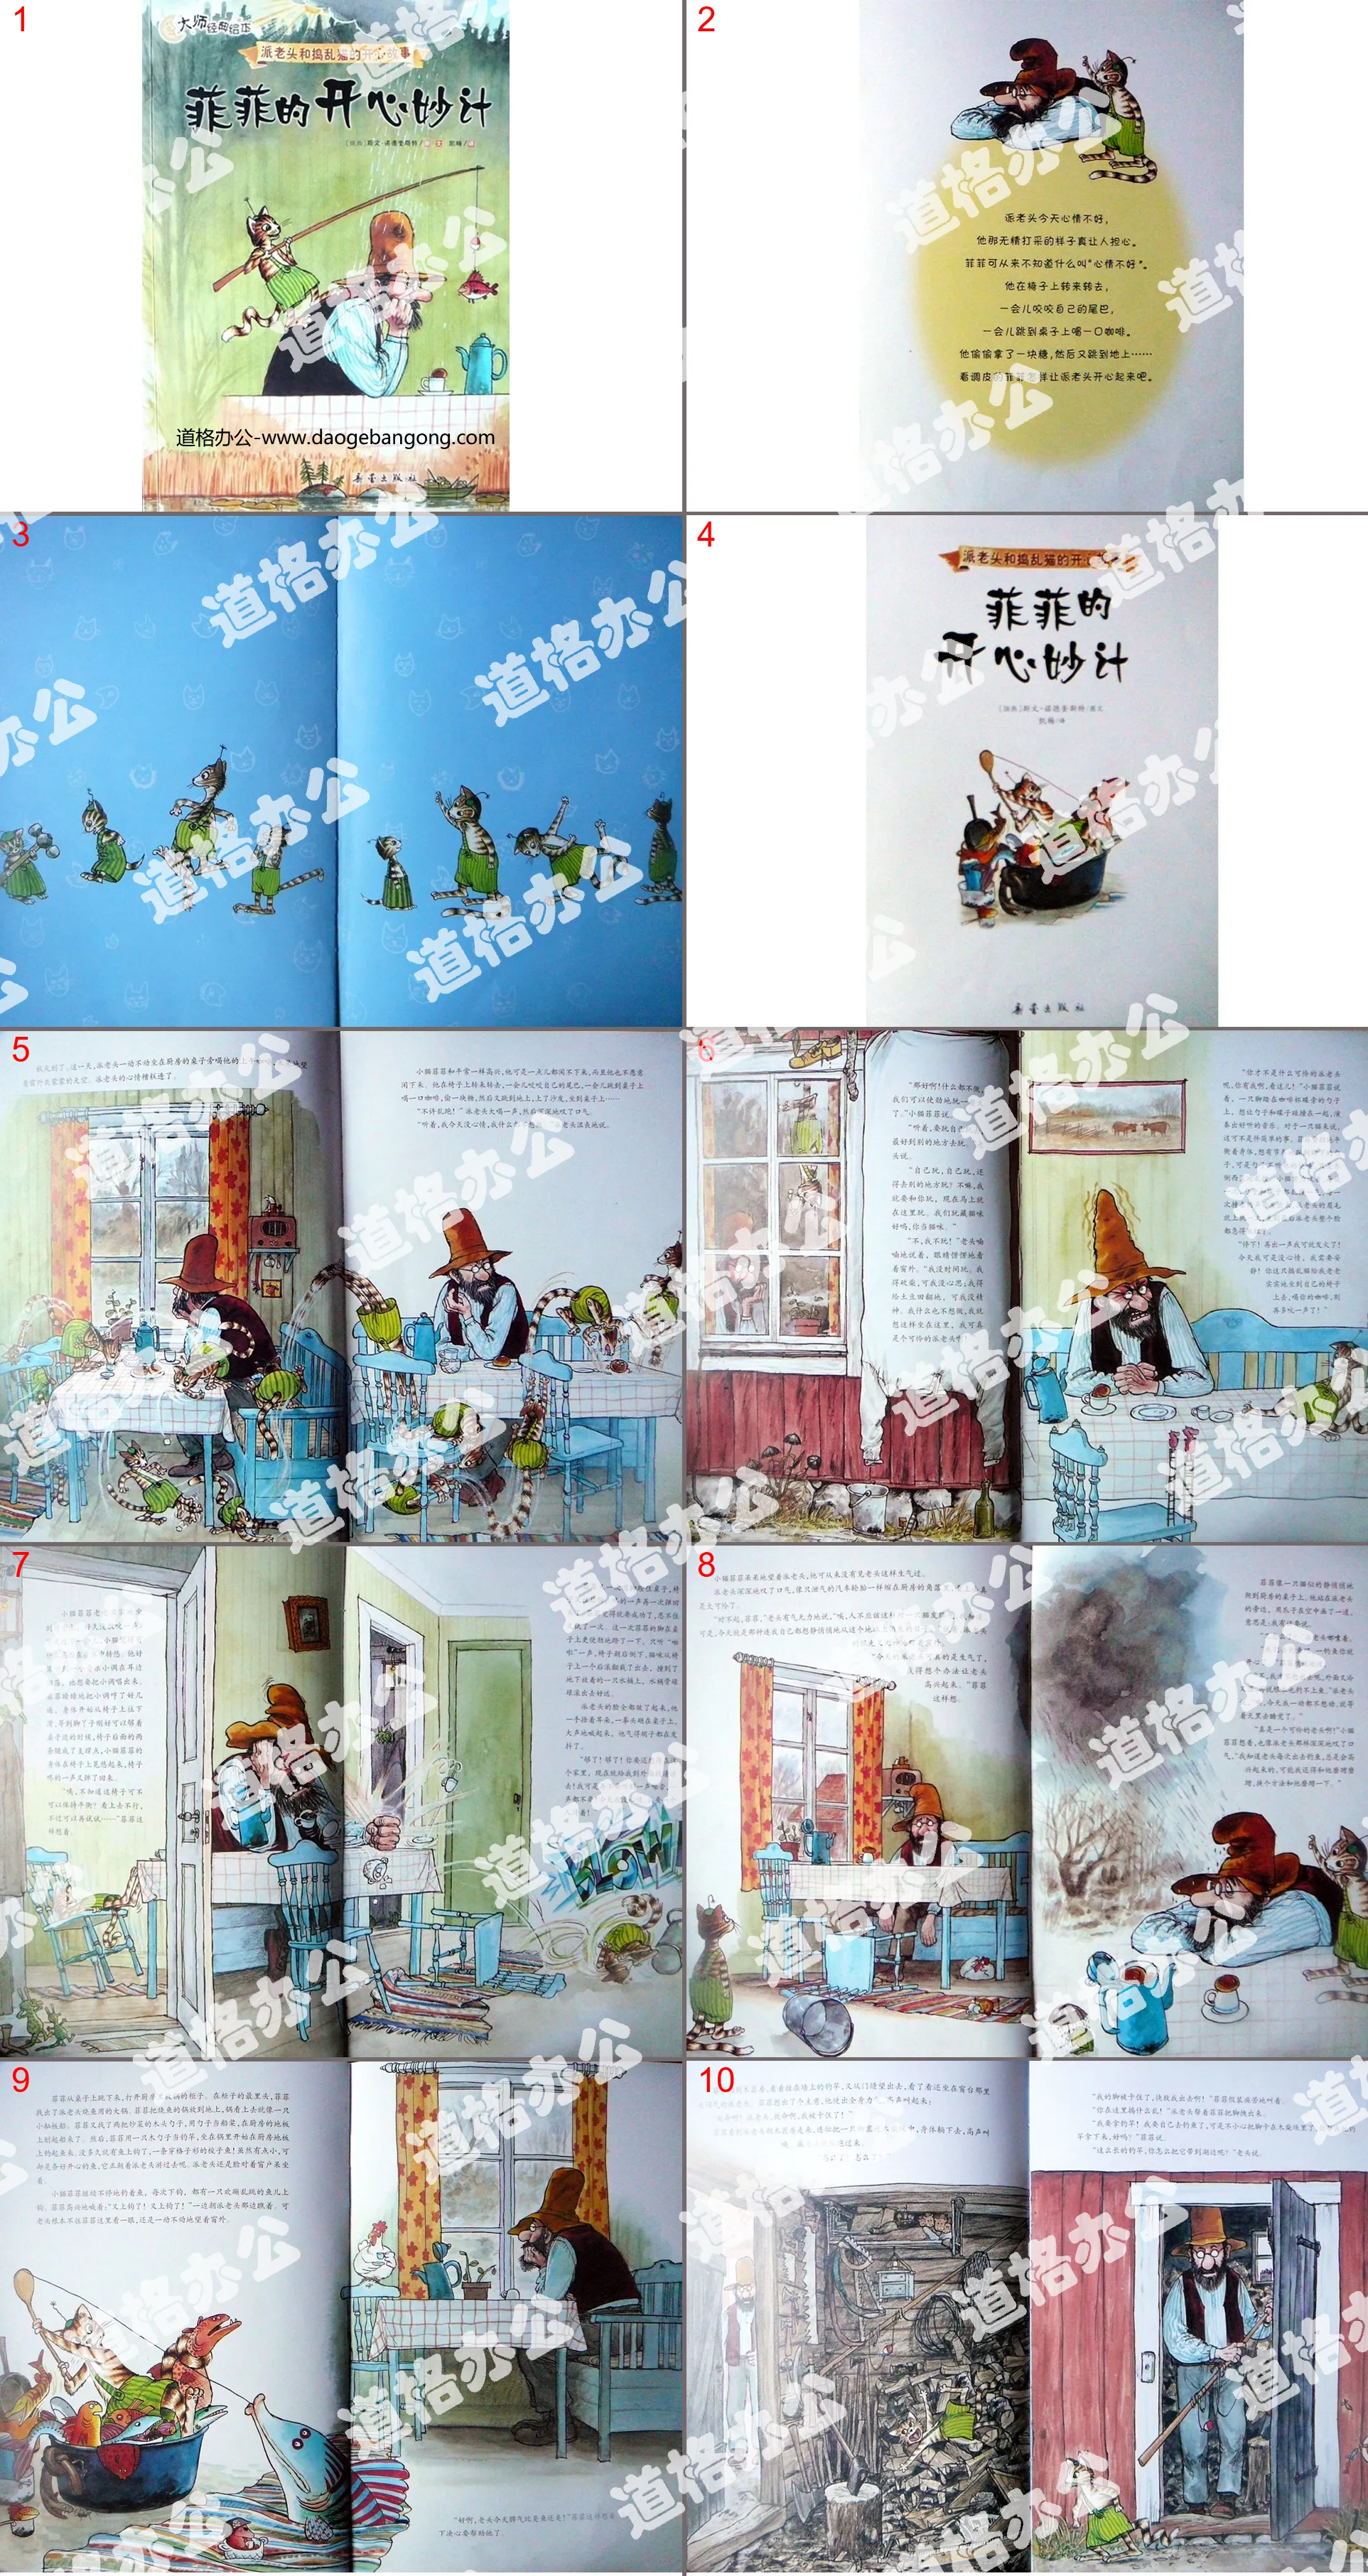 "Feifei's Happy Plan" PPT picture book story download